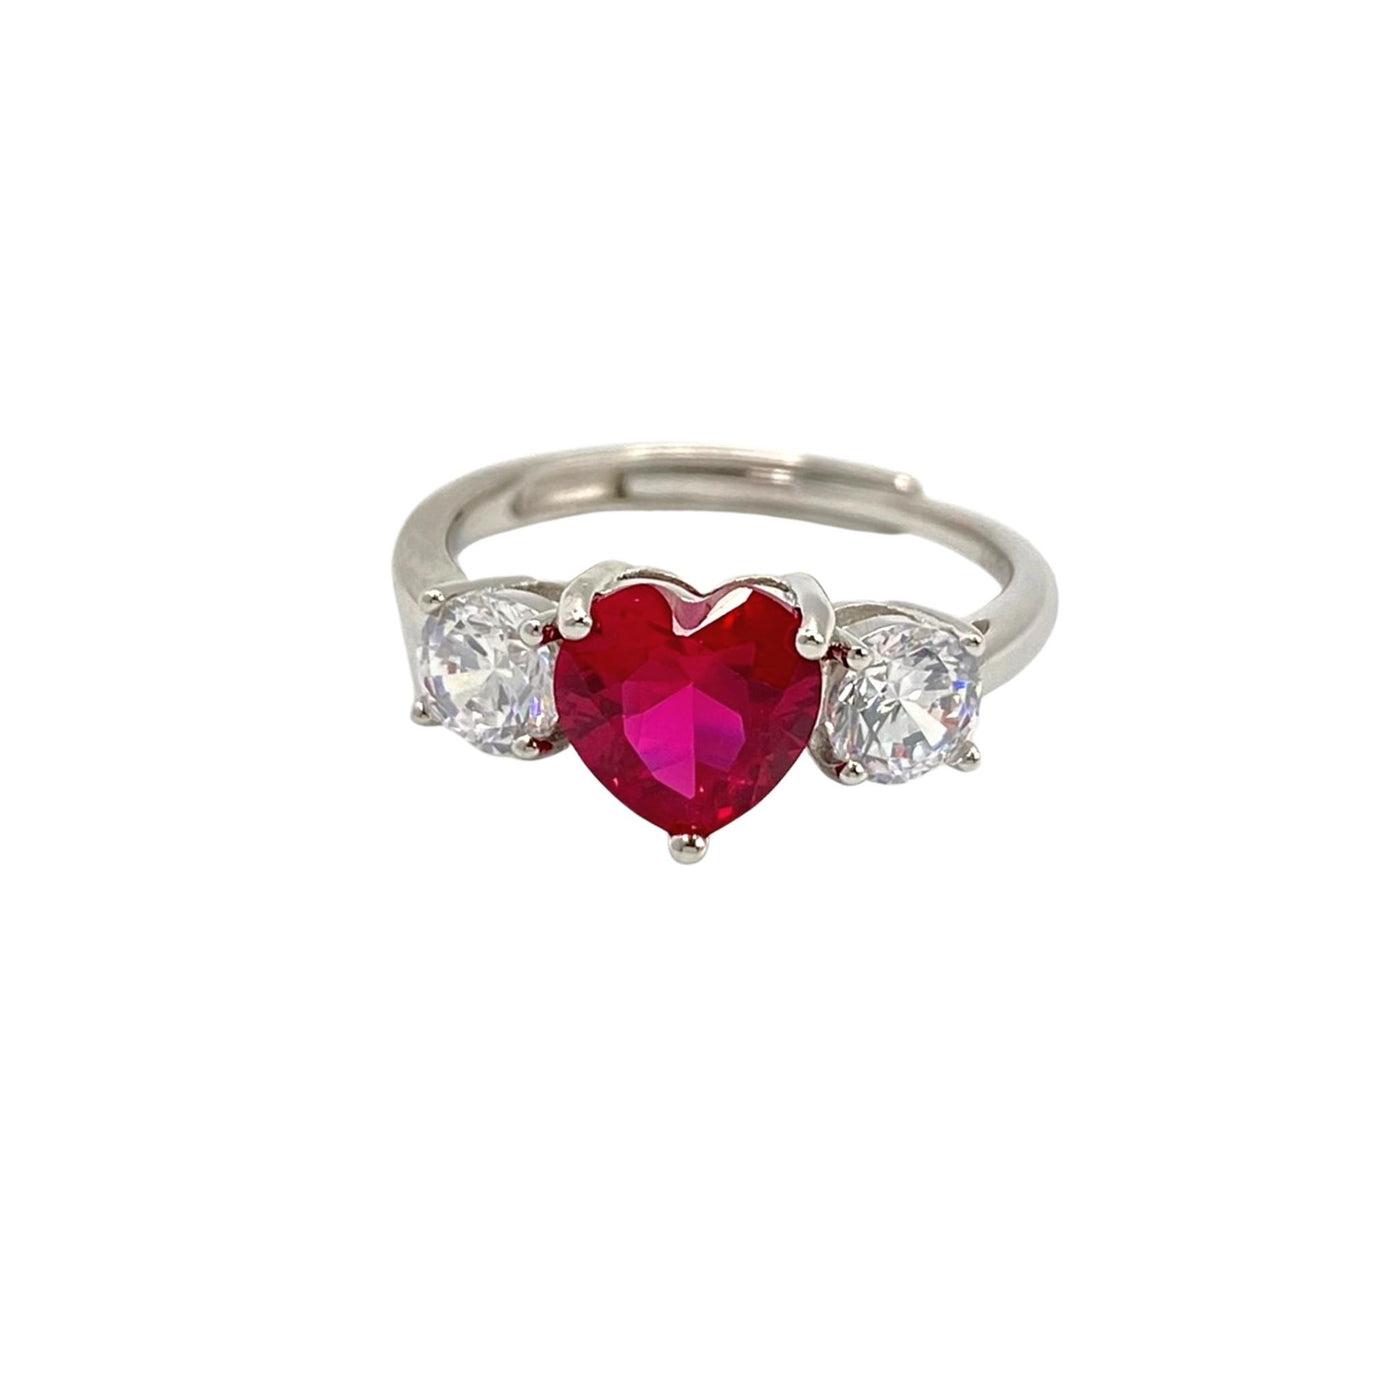 Silver ring with heart